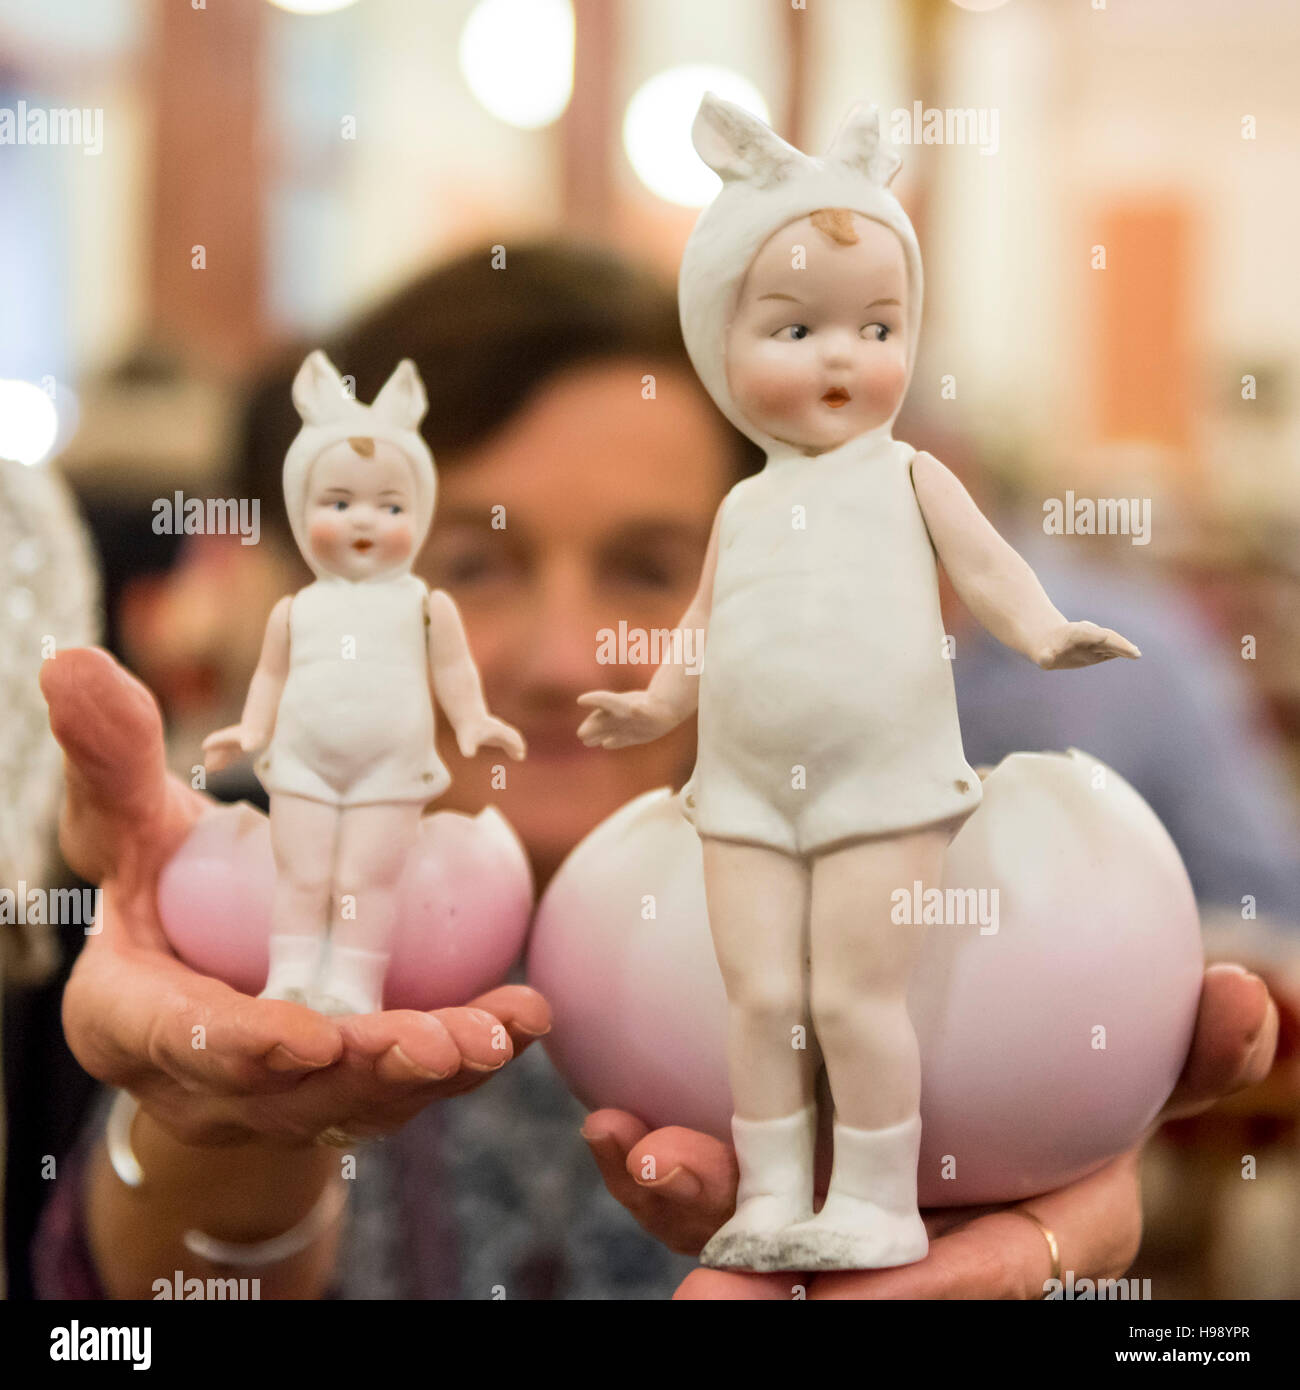 London, UK.  20 November 2016. German Heubach Easter themed bisque (unglazed china) eggs are shown.  Collectors attend the inaugural London International Antique Doll, Teddy Bear and Toy Fair at Kensington's Olympia where dealers from around the world are presenting for sale rare and collectable dolls, teddy bears and toys from 1750-1950. Credit:  Stephen Chung / Alamy Live News Stock Photo